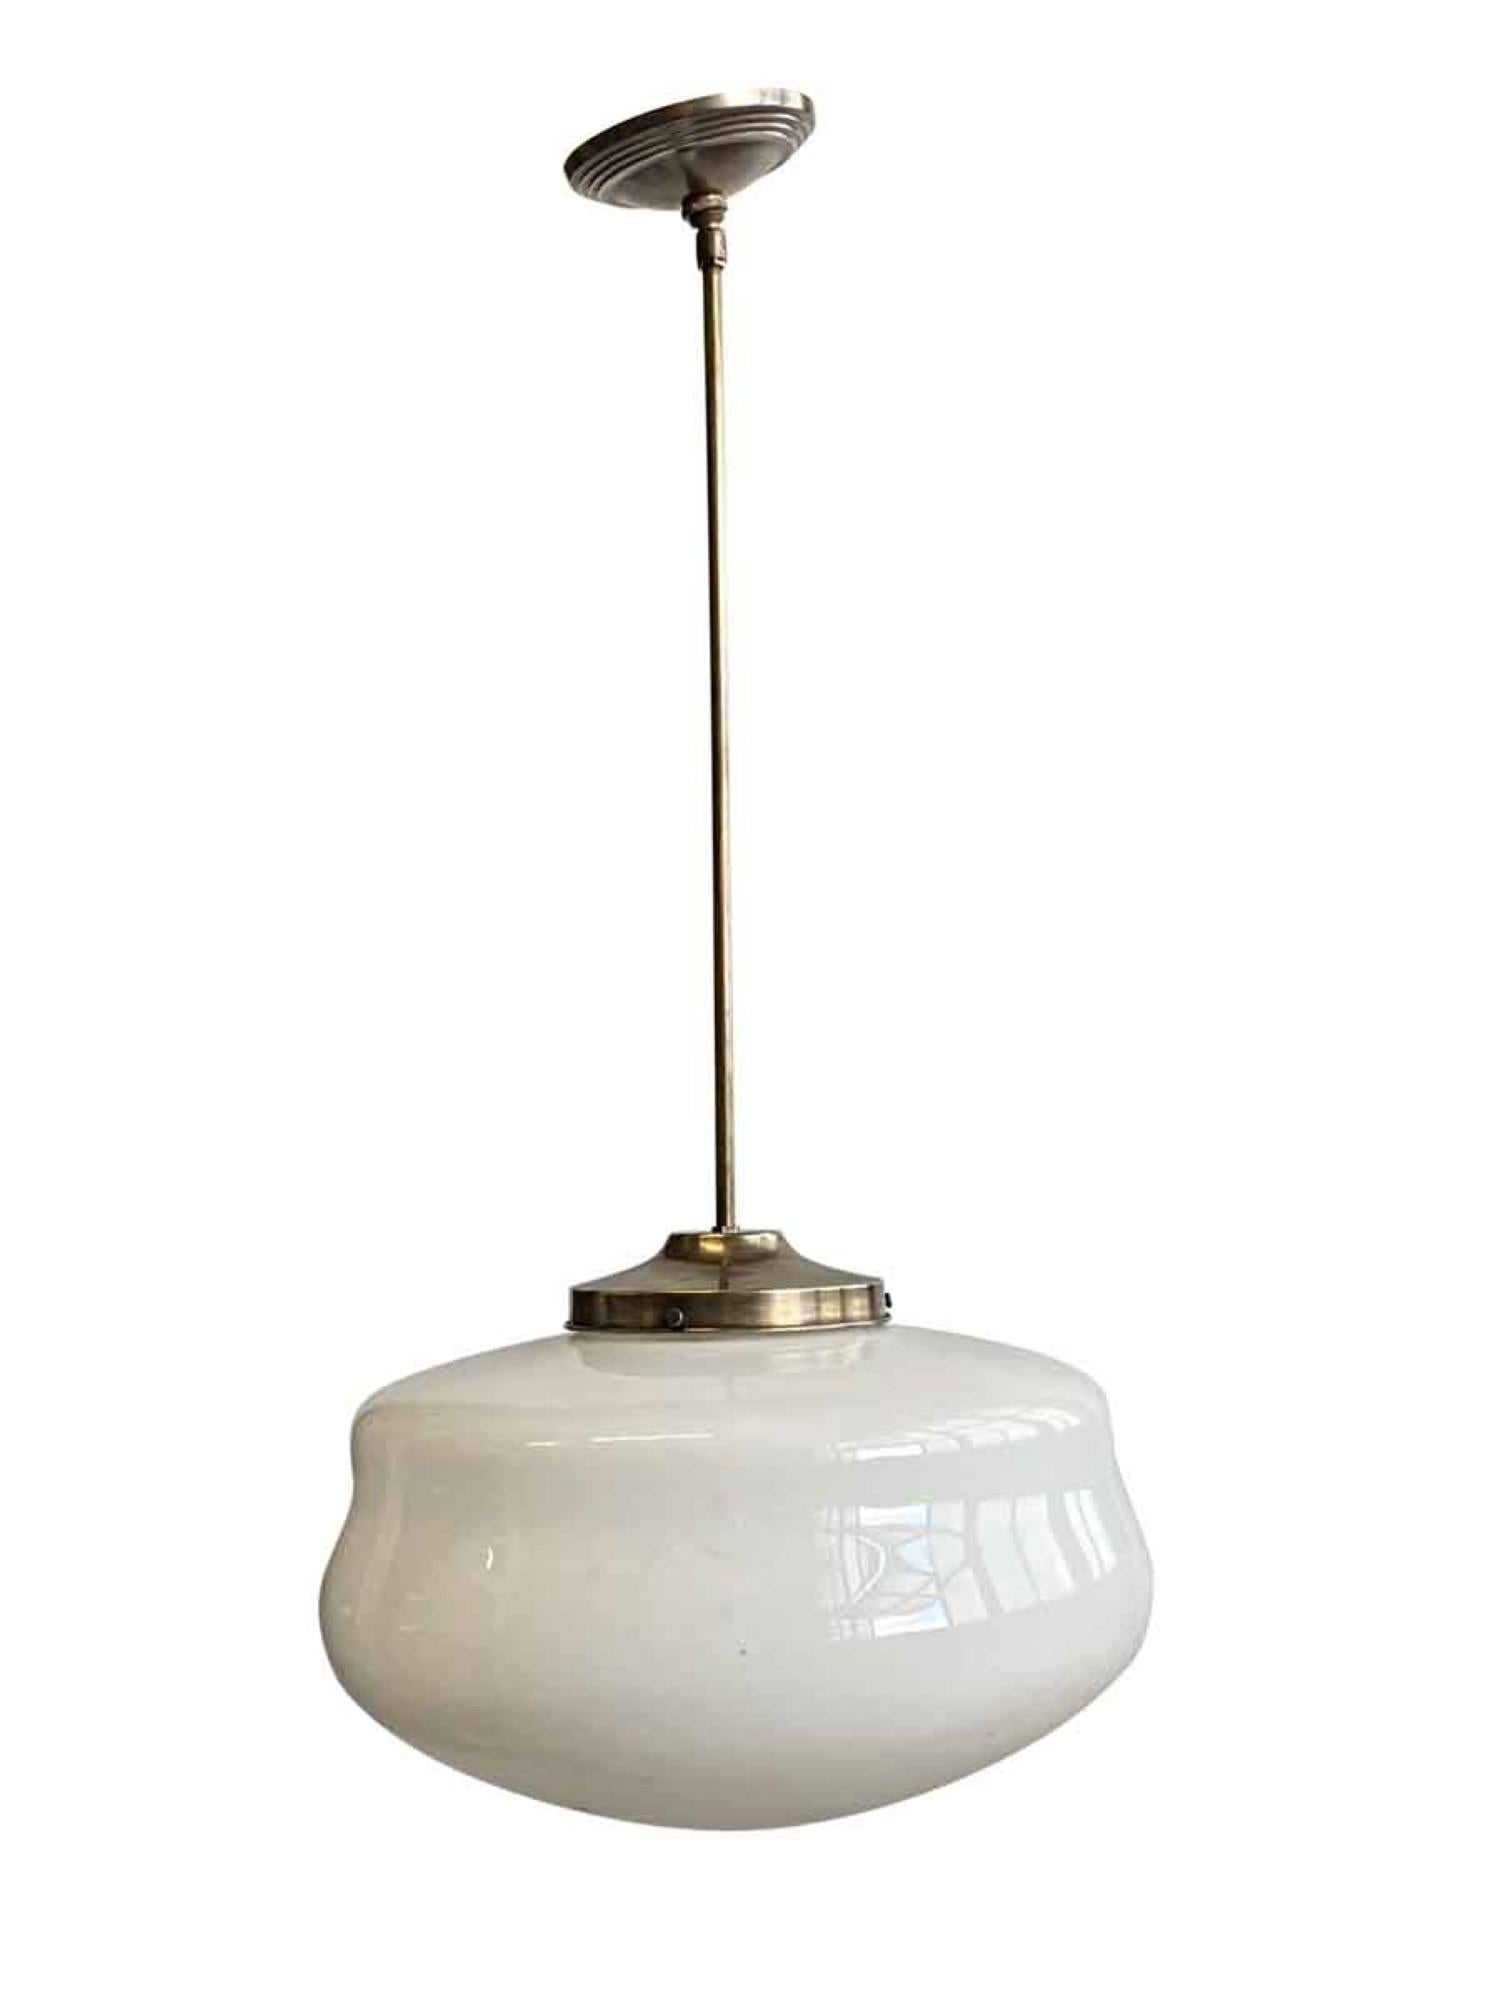 1940s schoolhouse globe pendant light mounted on a newly made brass pole fitter. Small quantity available at time of posting. Priced each. This can be viewed at our Scranton, Pennsylvania location. Please inquire for the exact address.